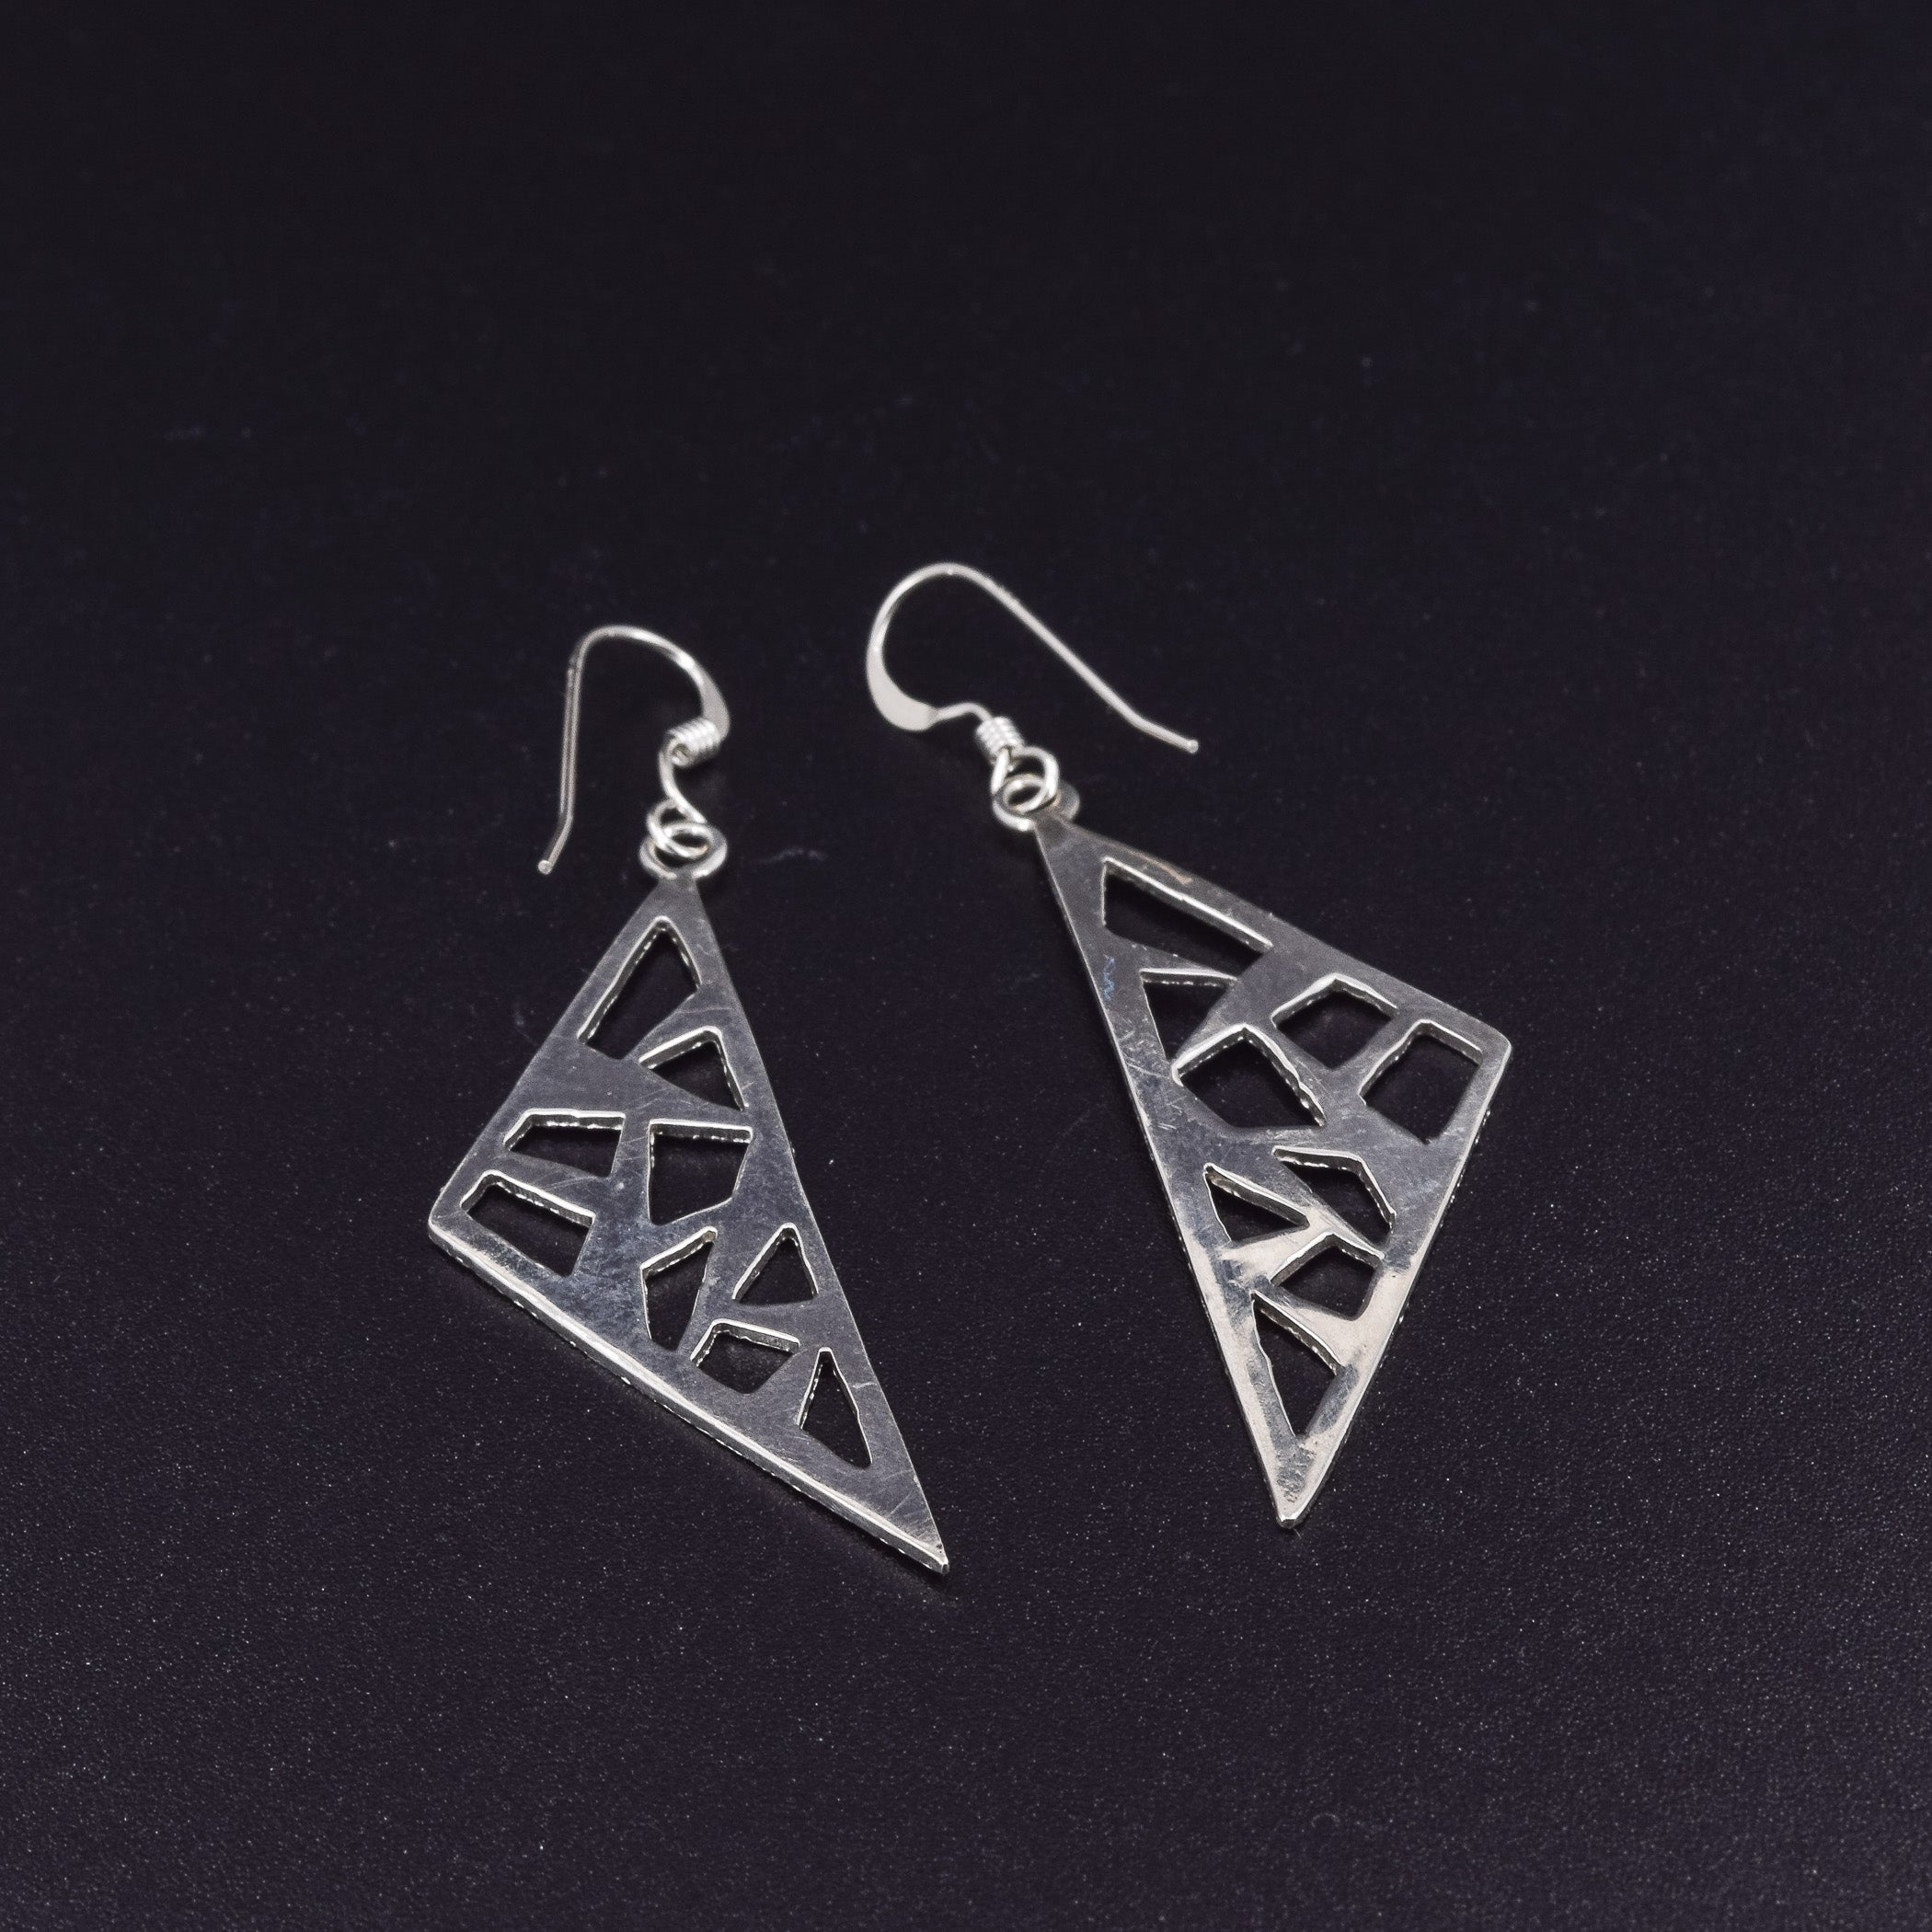 Triangle dangle earrings in sterling silver pierced with a modern design with a polished finish